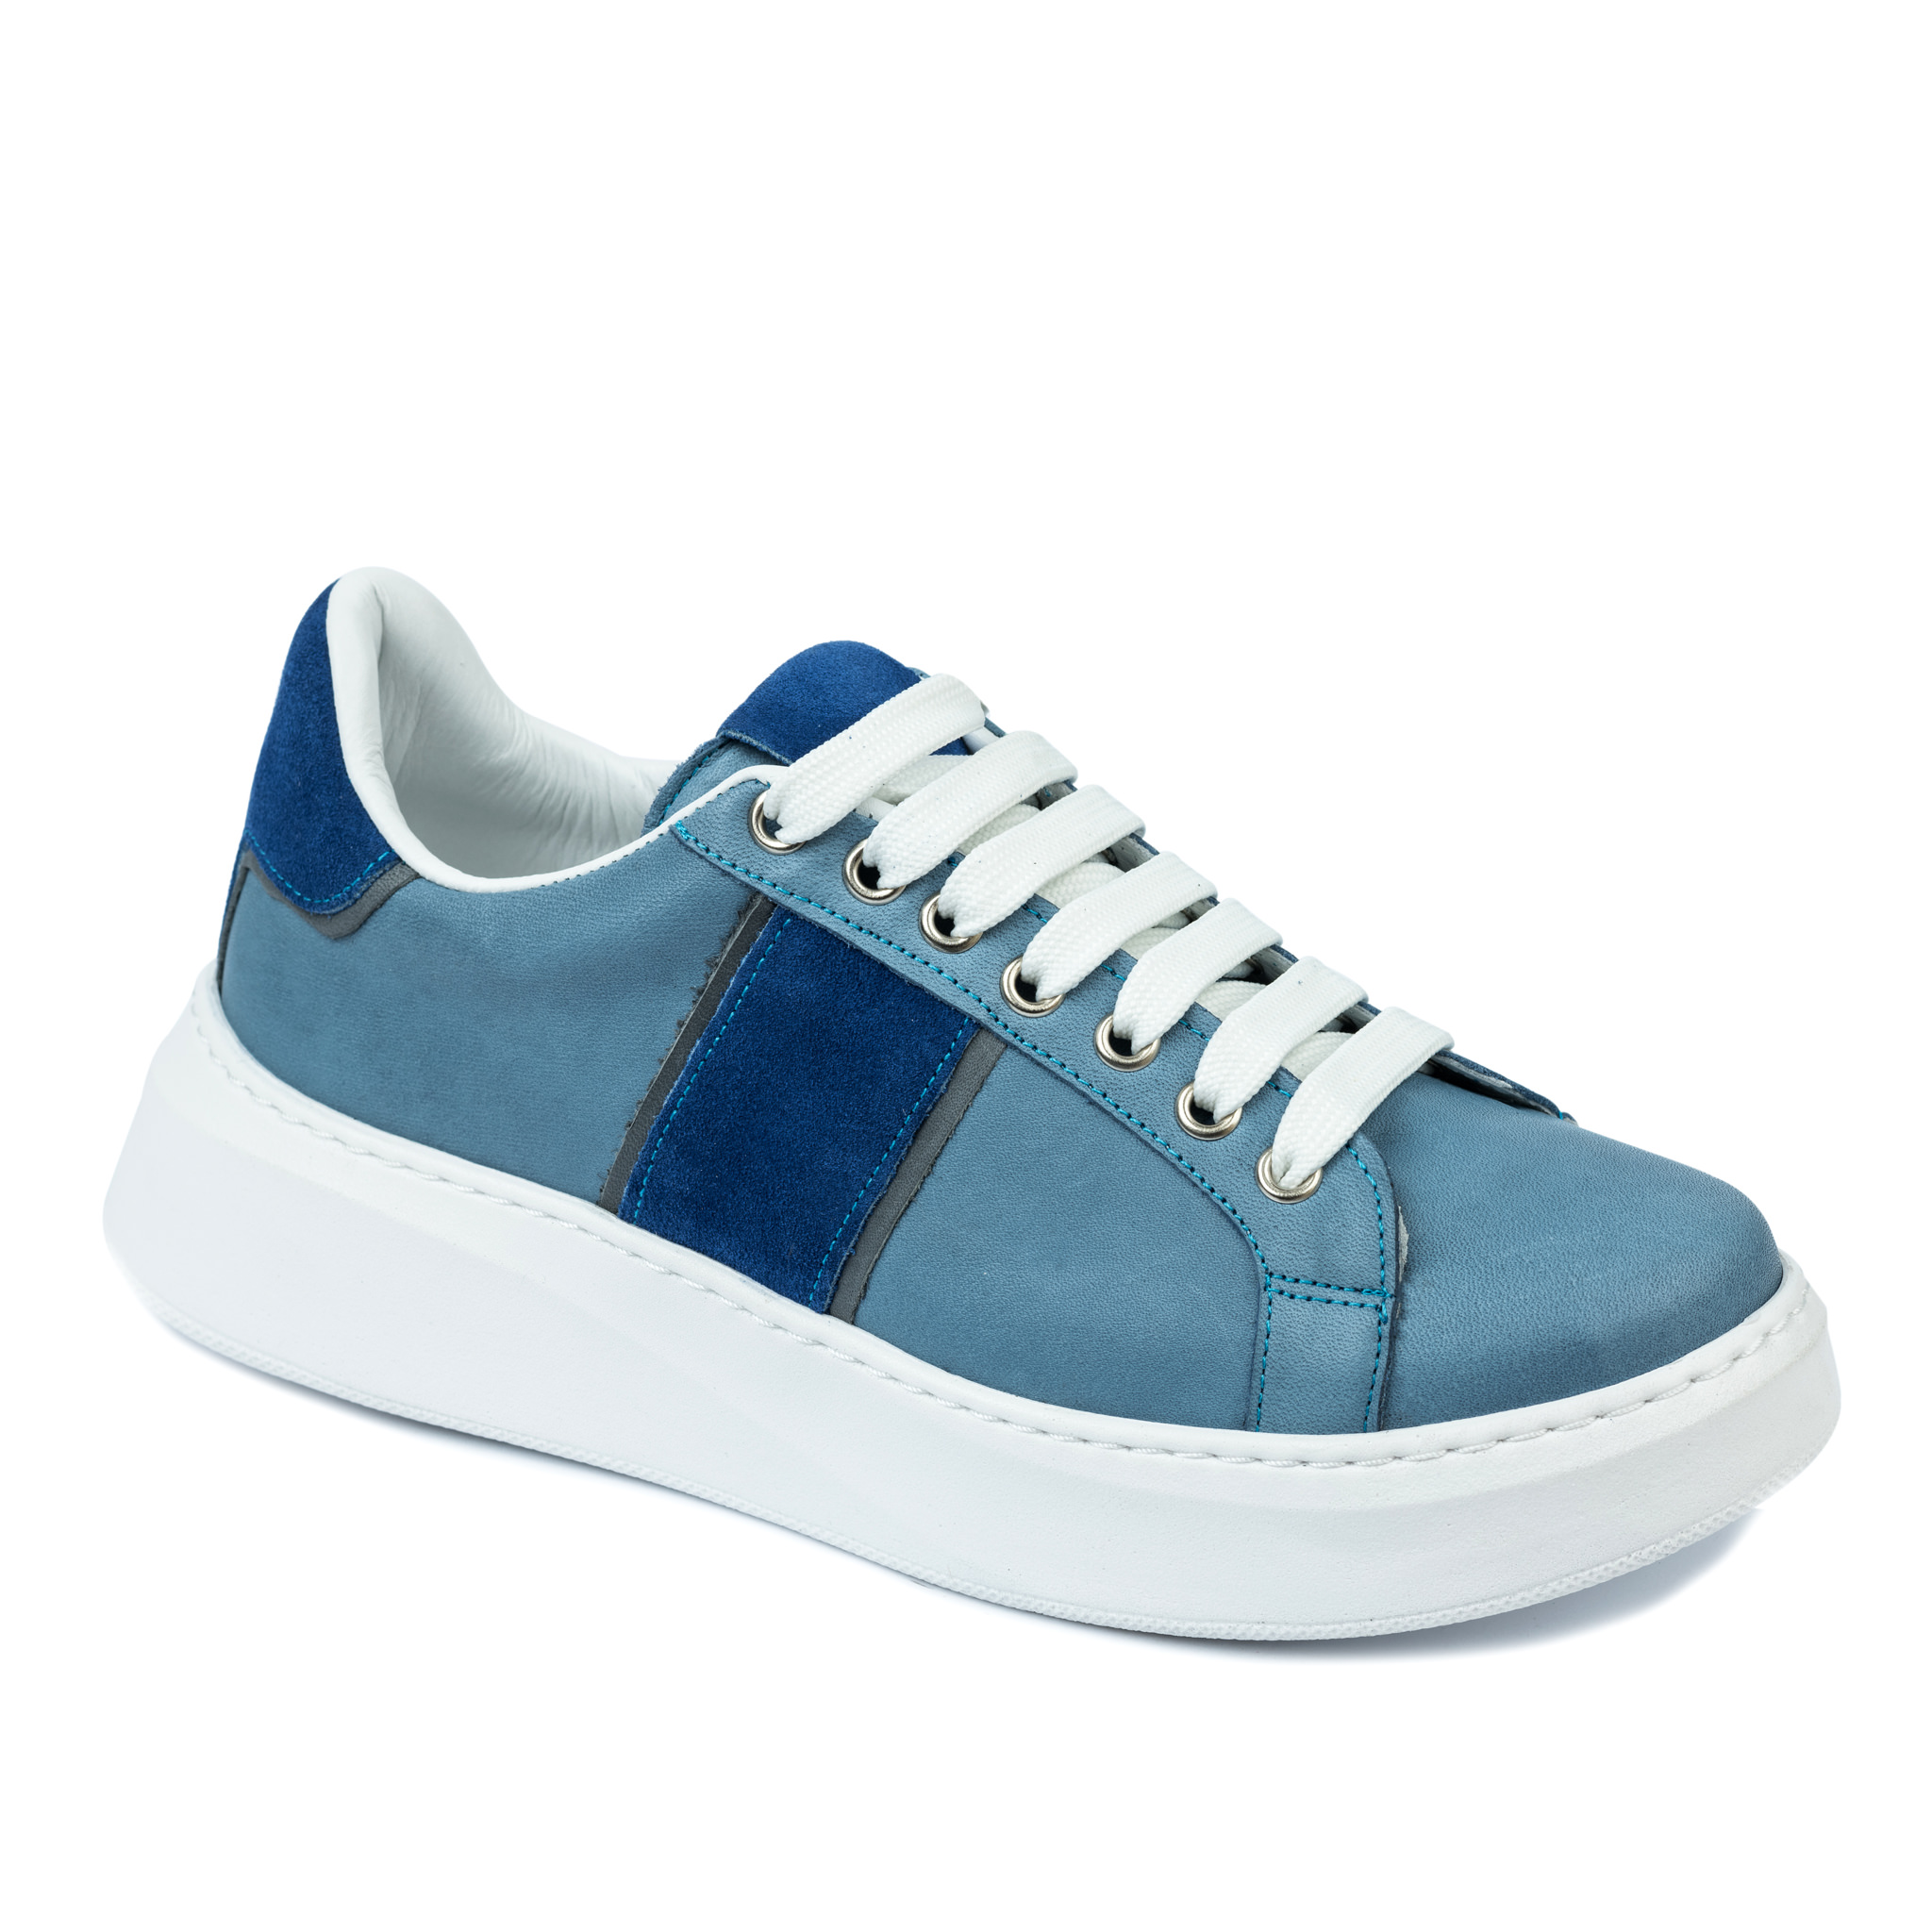 Leather sneakers A237 - BLUE